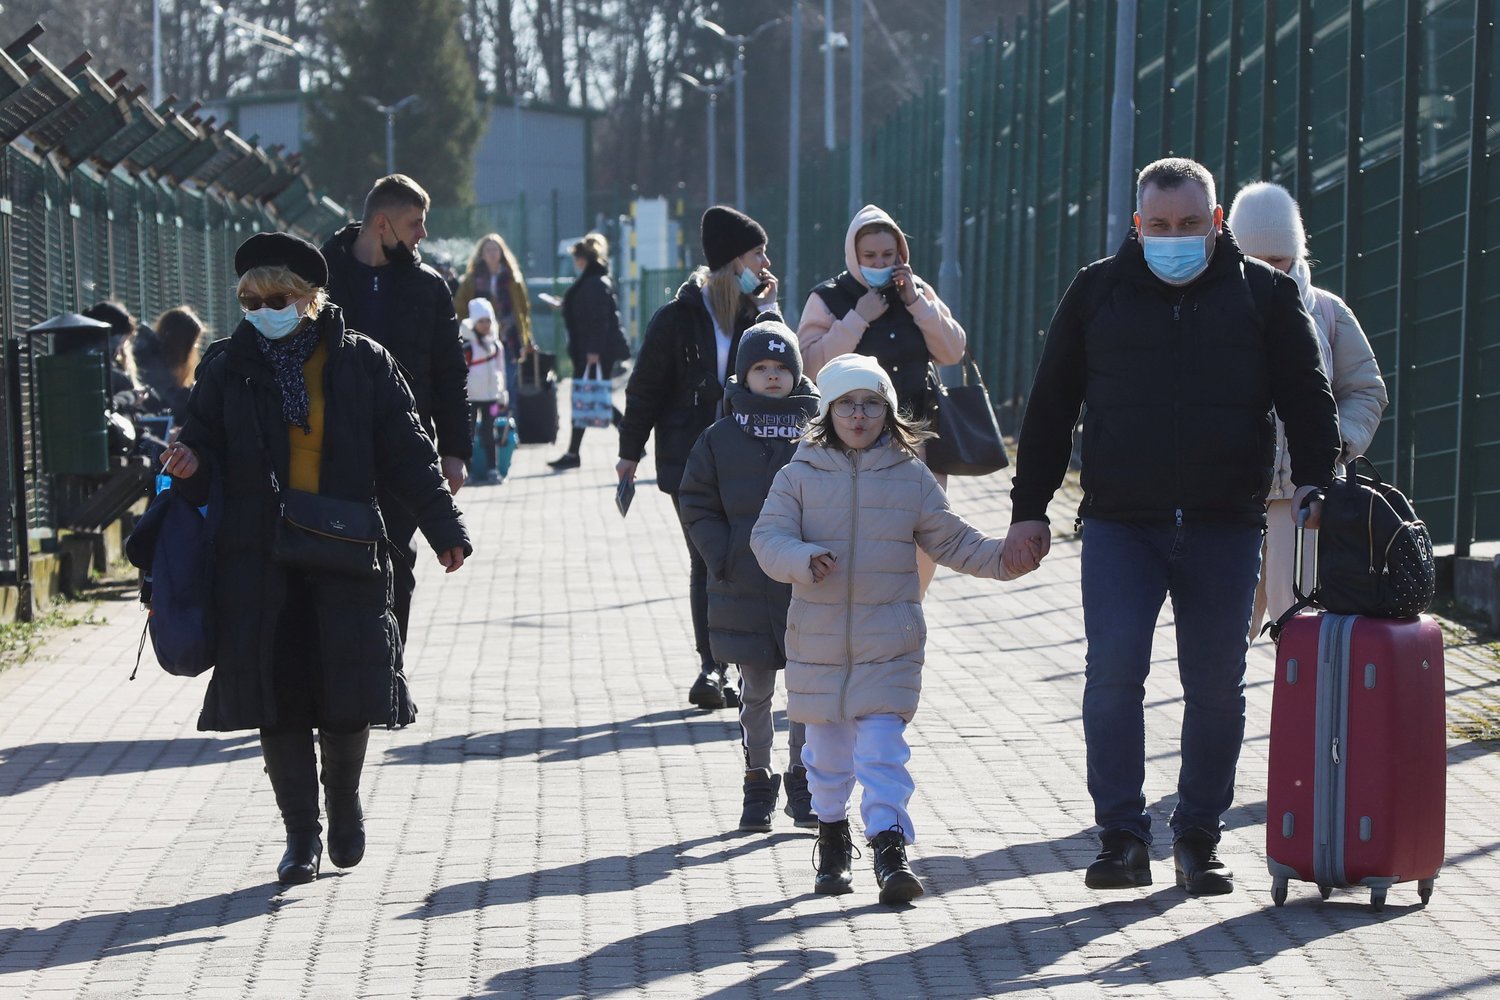 A family carry their belongings walk at the border crossing between Poland and Ukraine in Medyka, Poland, Feb. 24, 2022, after Russian President Vladimir Putin authorized a military operation in eastern Ukraine.